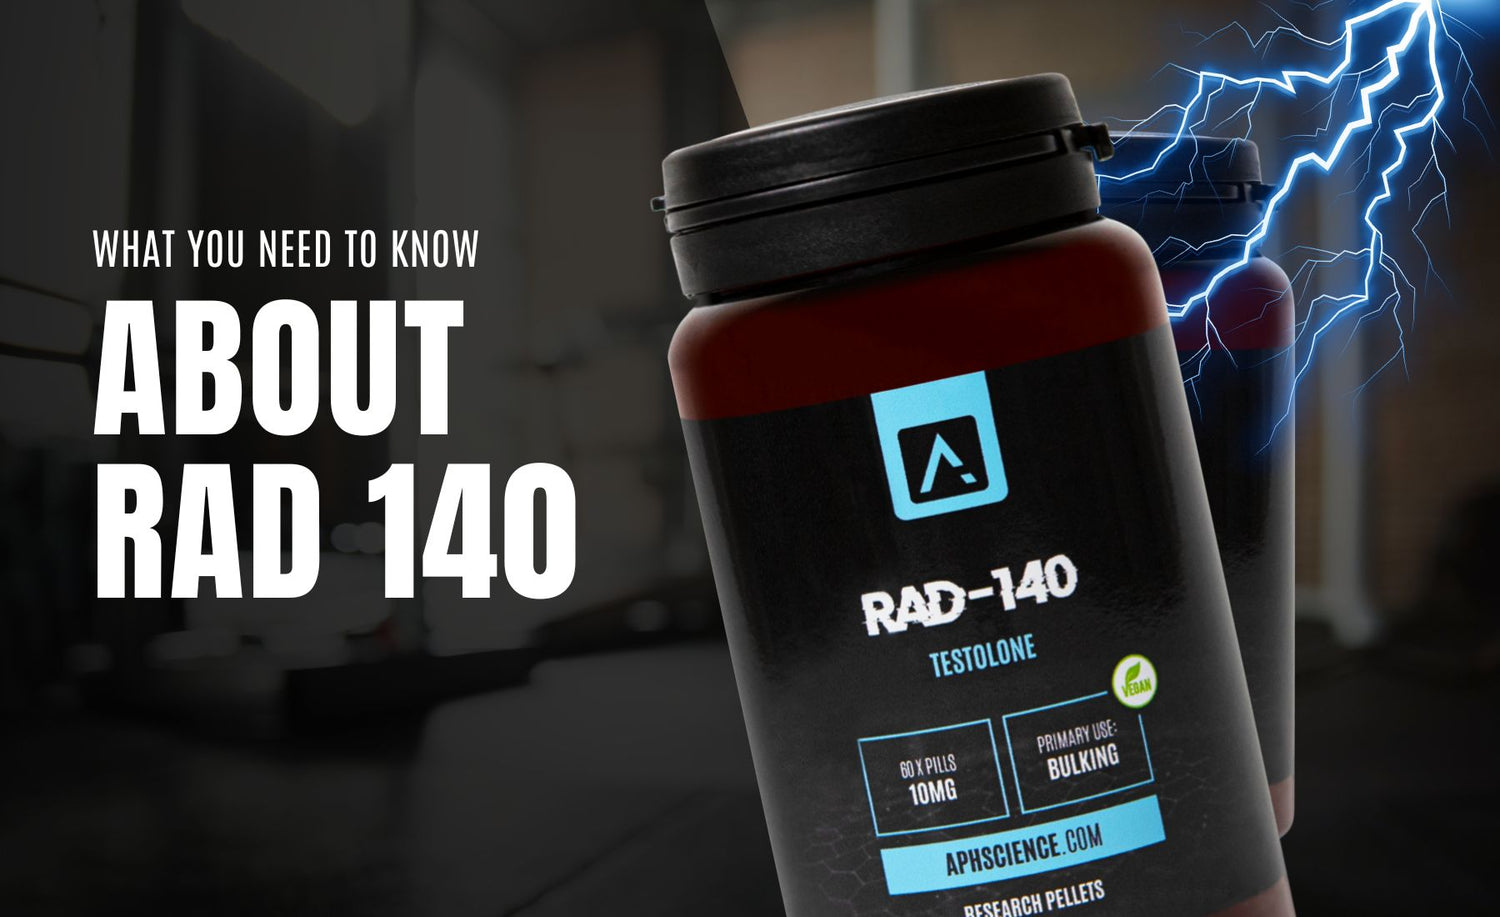 What You Need to Know About RAD 140